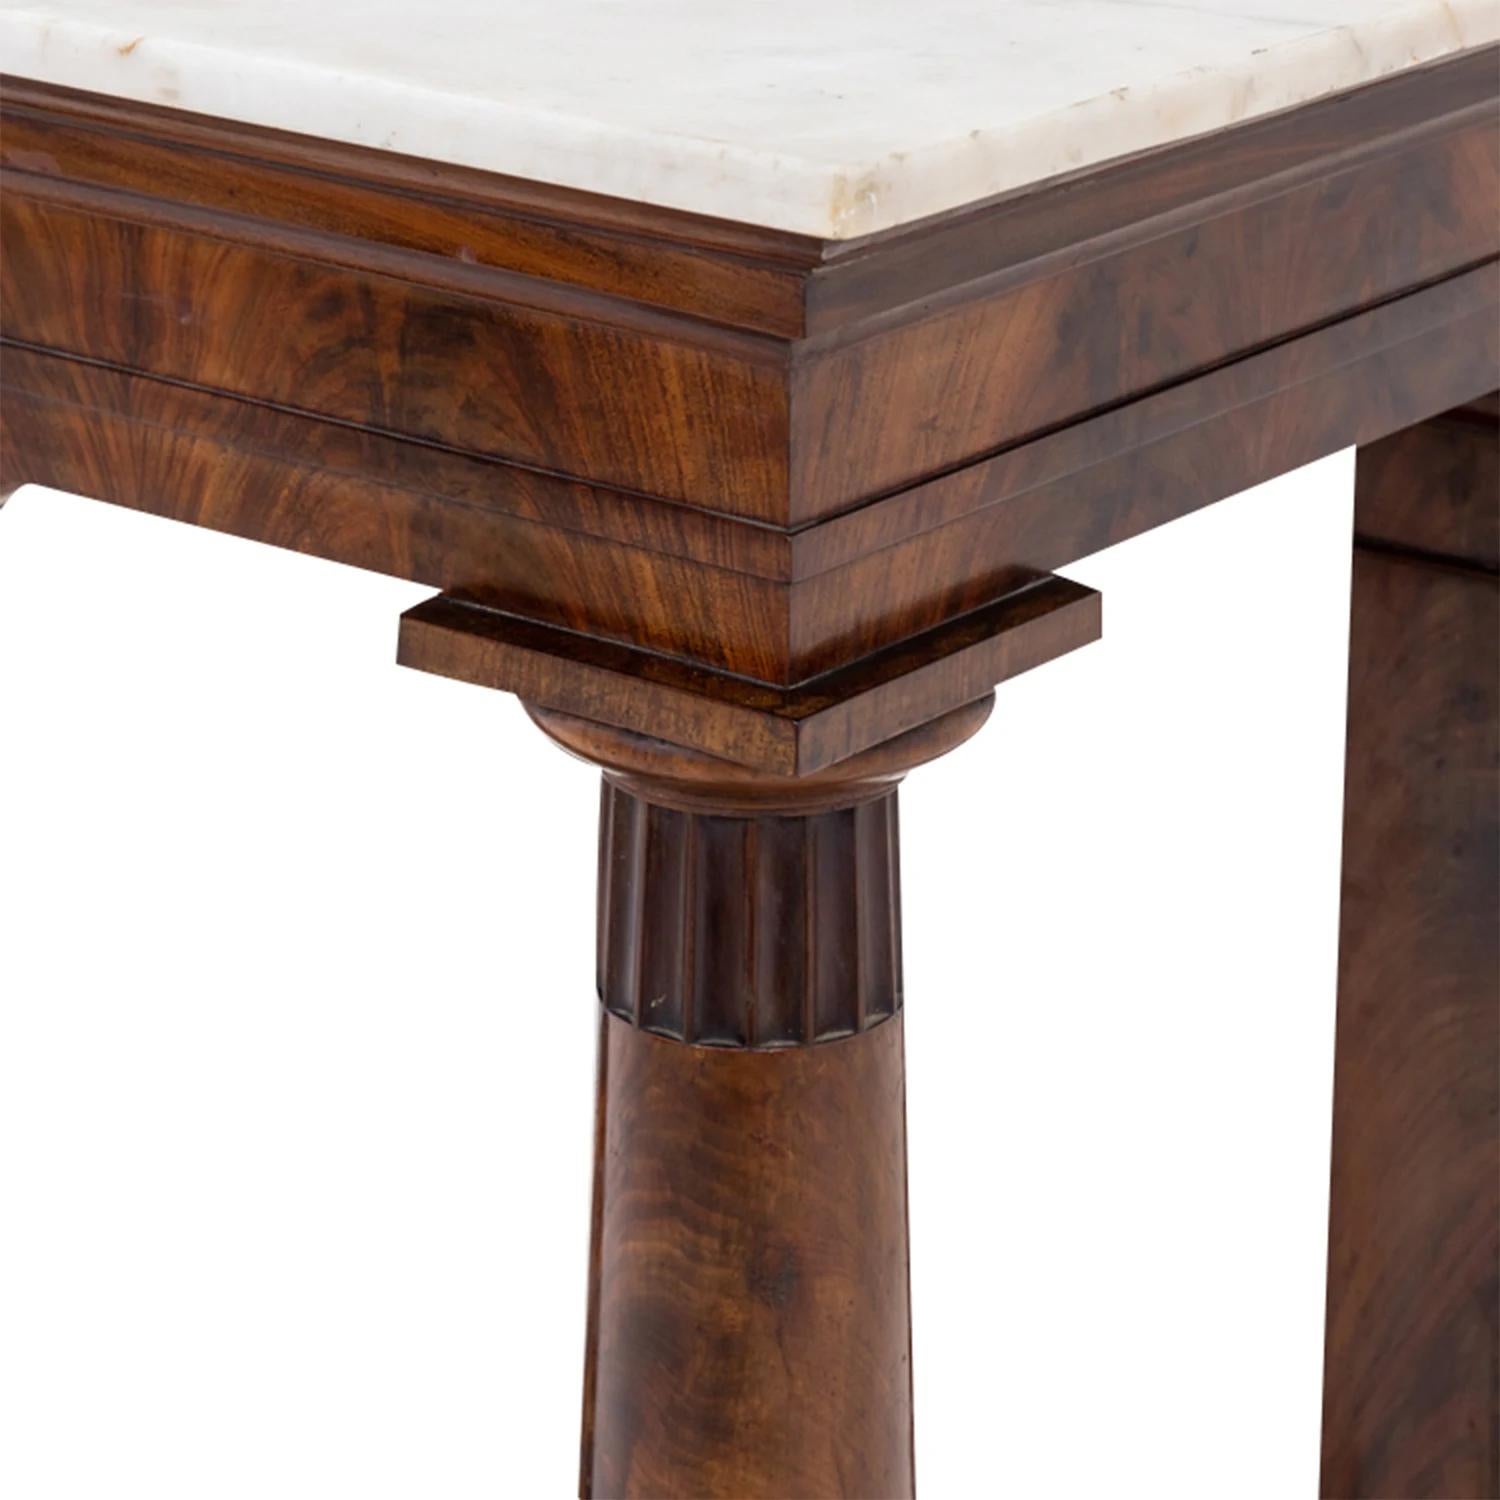 19th Century Italian Freestanding Mahogany Center Table - Antique Console Table For Sale 1